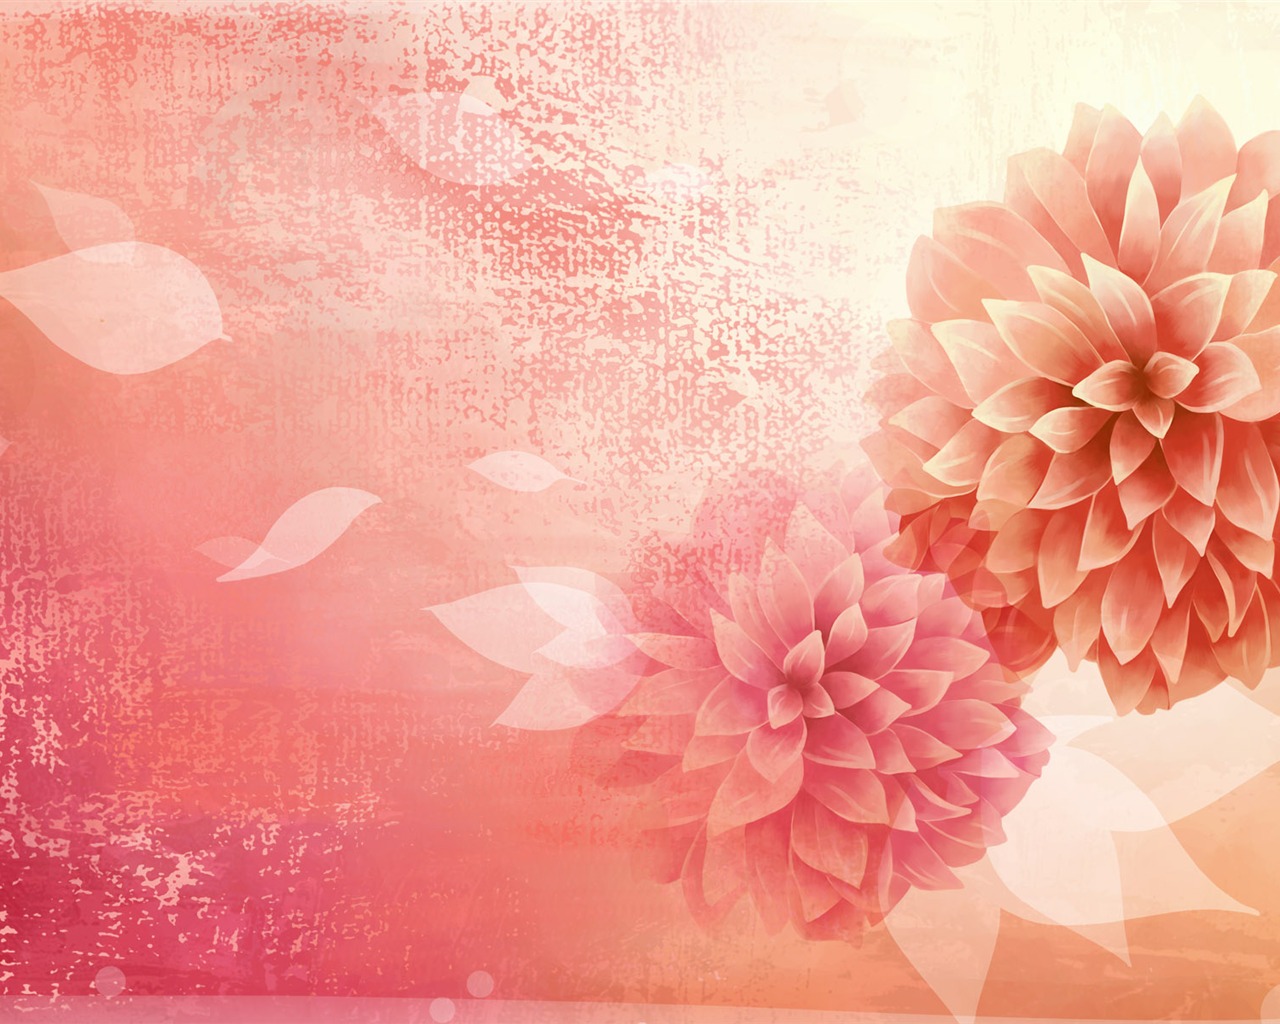 Synthetic Wallpaper Colorful Flower #22 - 1280x1024